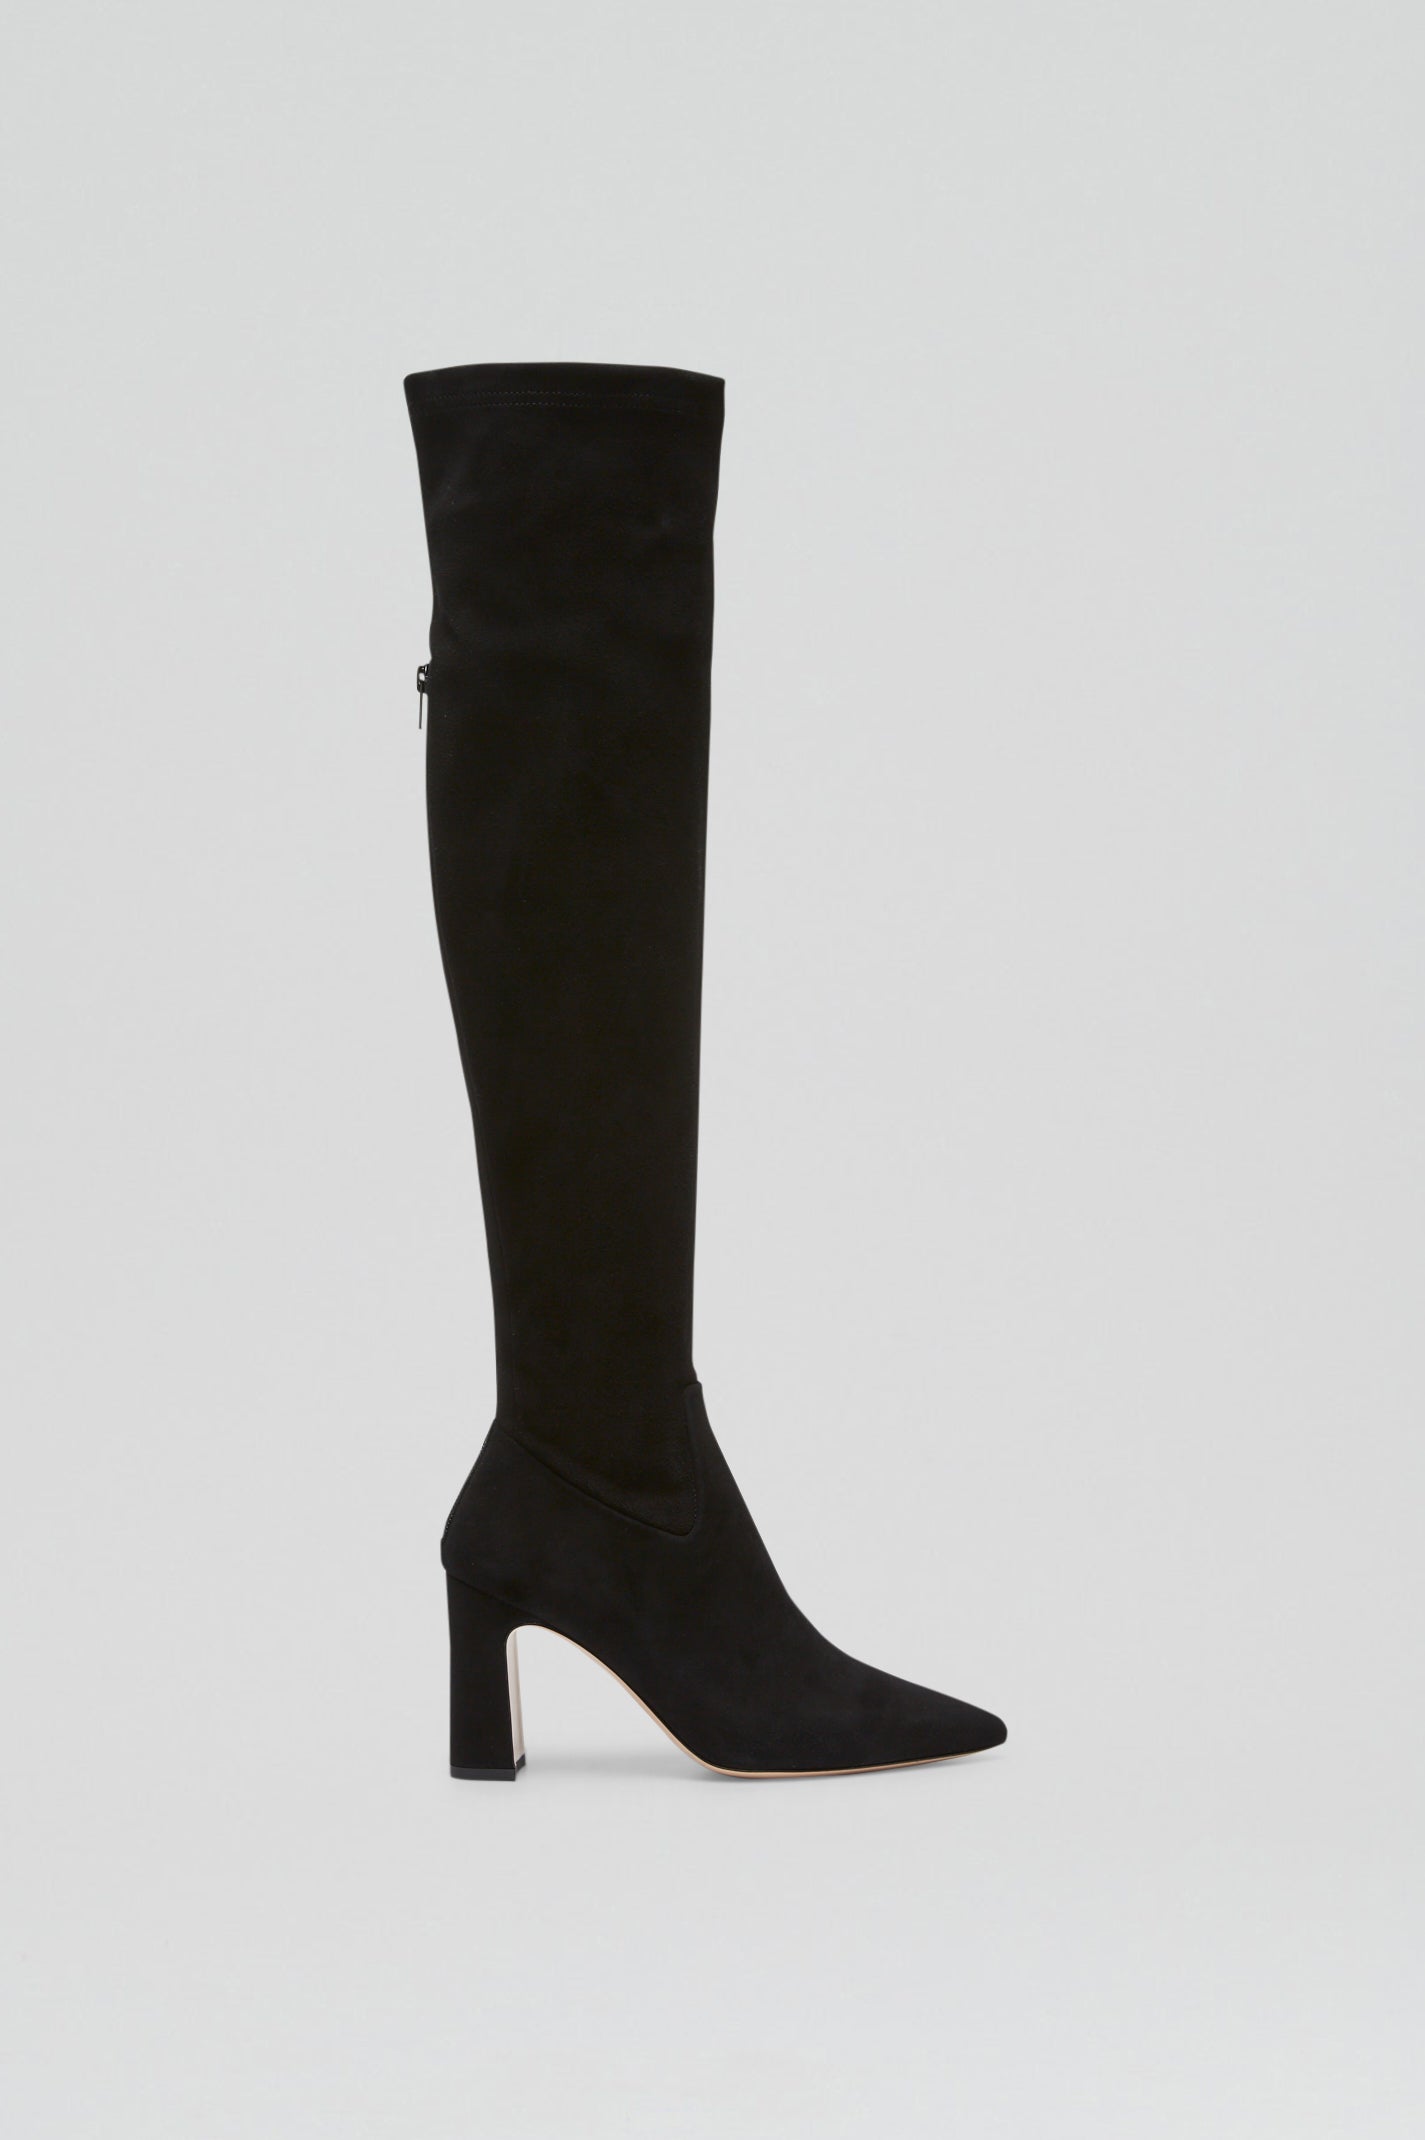 STRETCH SUEDE OVER THE KNEE BOOT 8.5